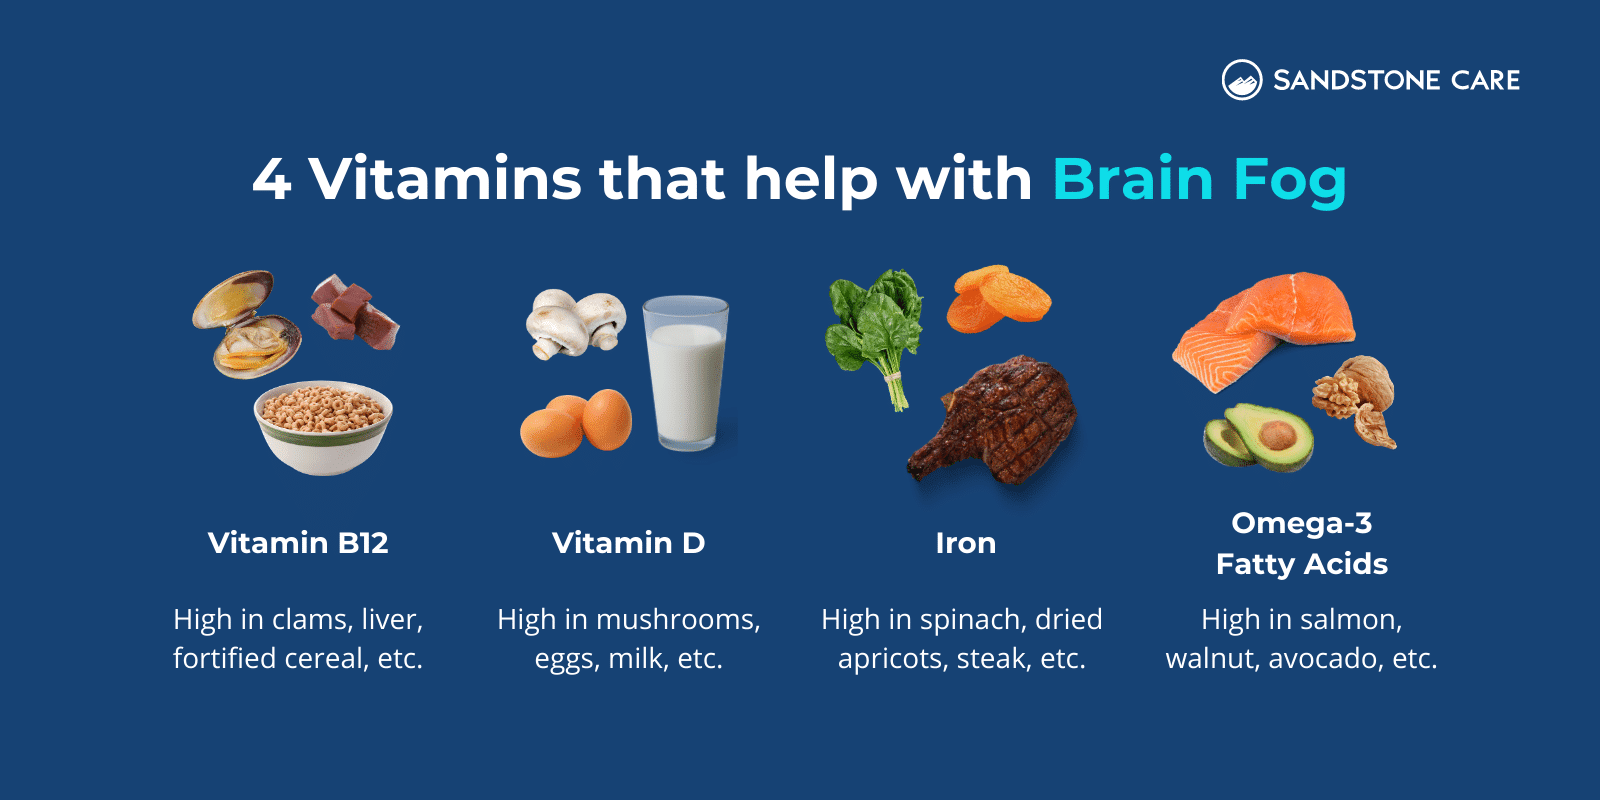 "4 vitamins that help with Brain fog" text written above the list of vitamins and food that contains a lot of those vitamins: Vitamin B2, Vitamin D, Iron, Omega-3 fatty acids